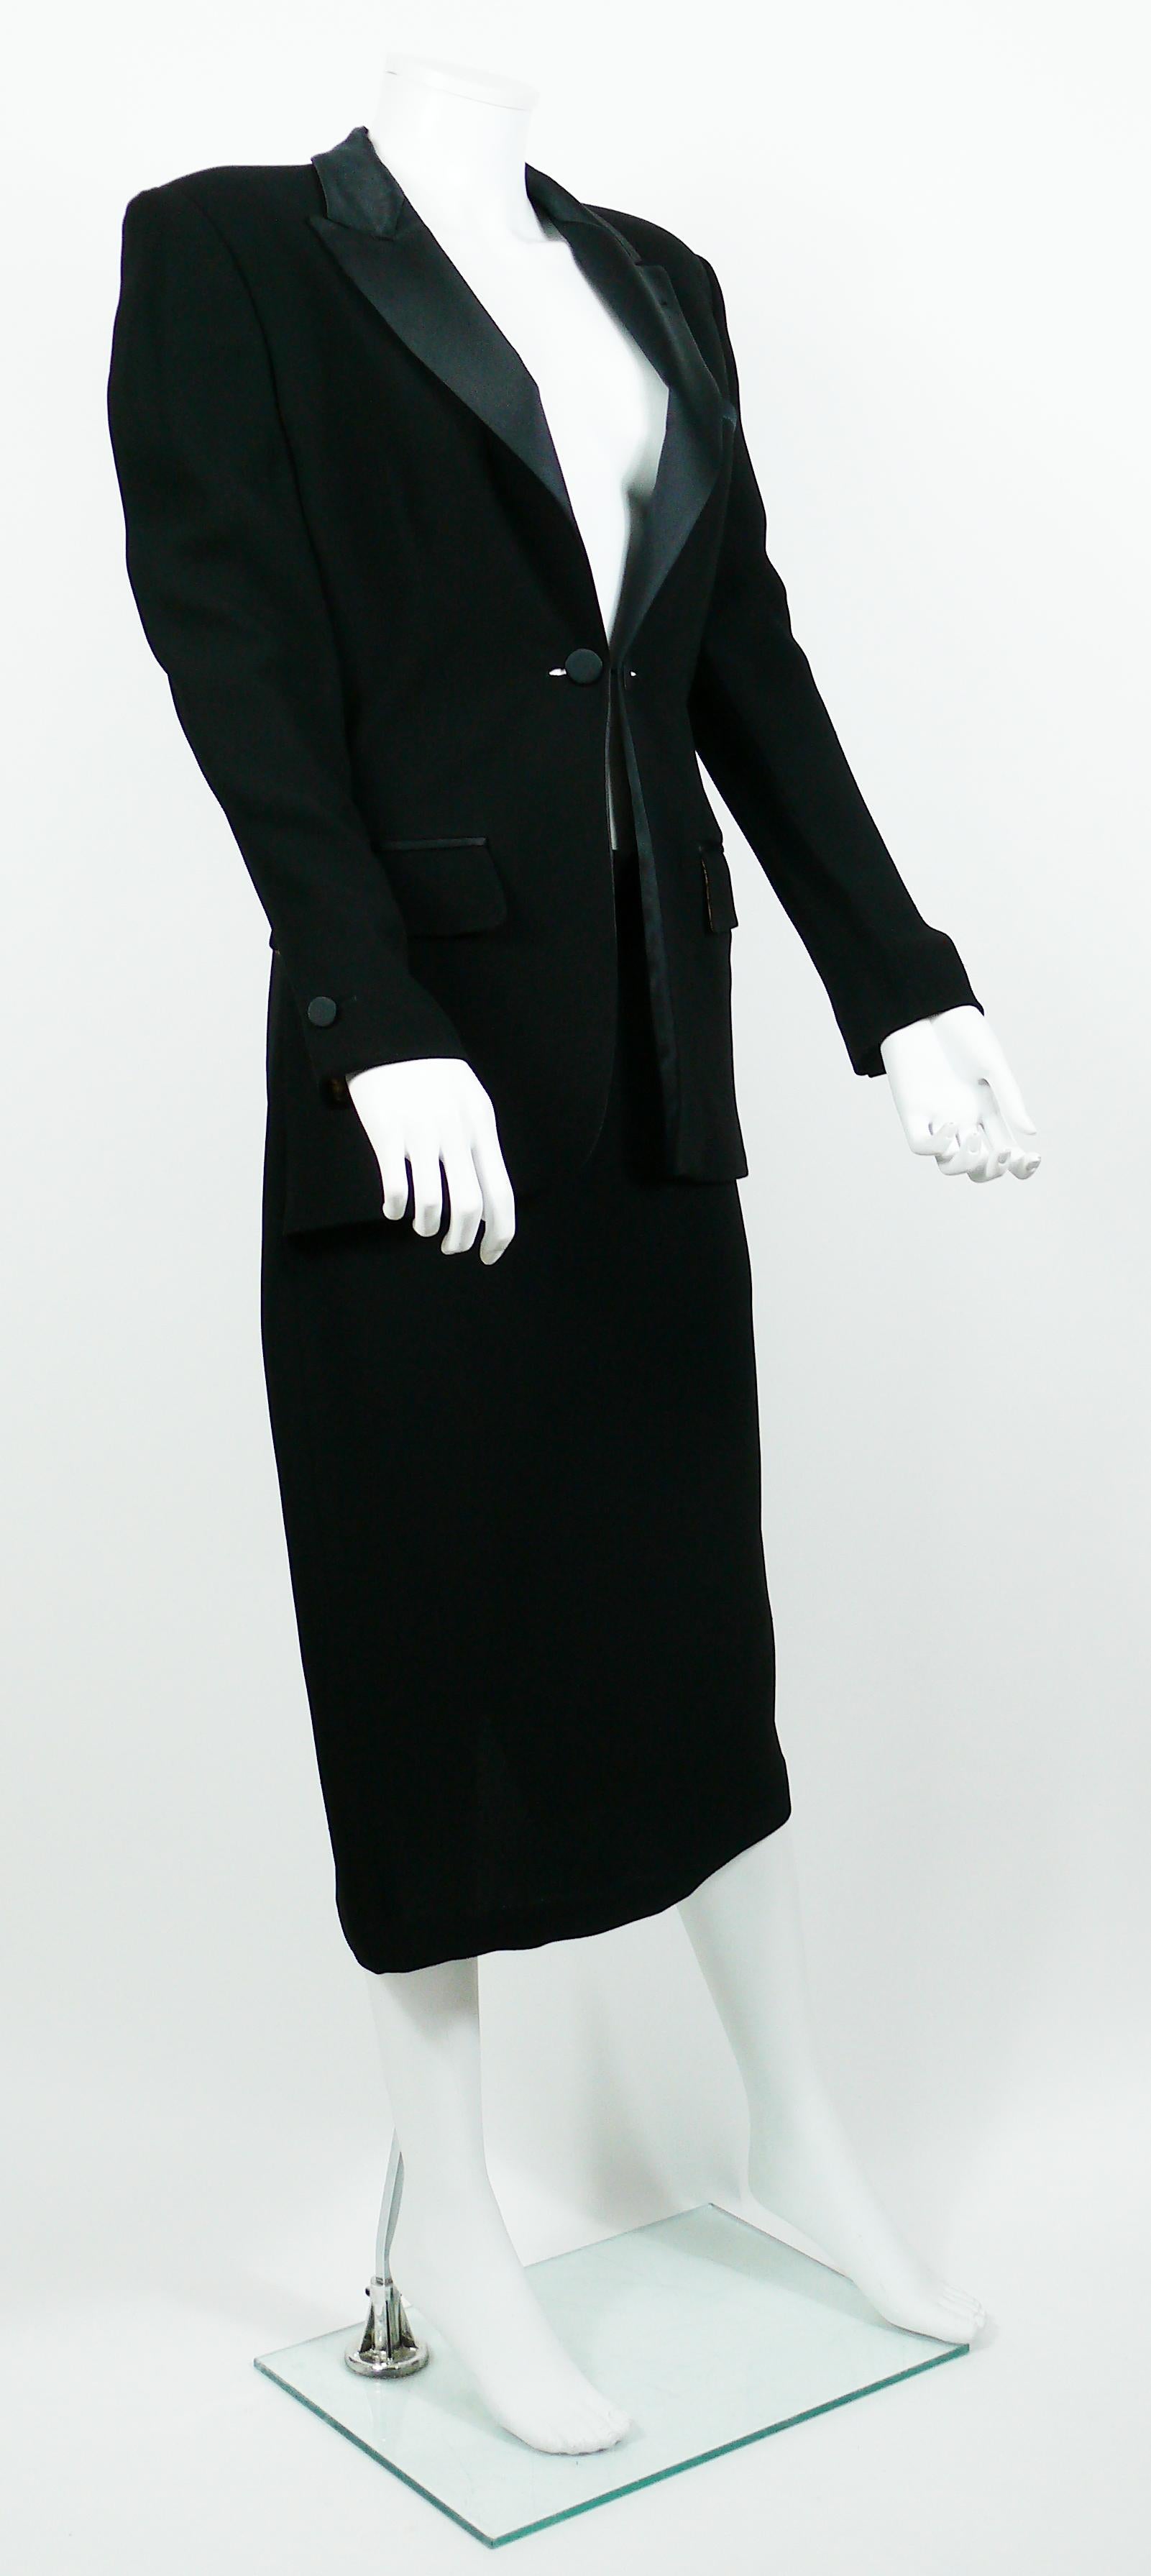 JEAN PAUL GAULTIER vintage rare and iconic black tuxedo dress.

This dress features :
- Black satin lapels.
- Zippered back with hook closure.
- Two buttons at the center front.
- Satin cuff buttons.
- Three satin trimmed pockets (still sewn).
-